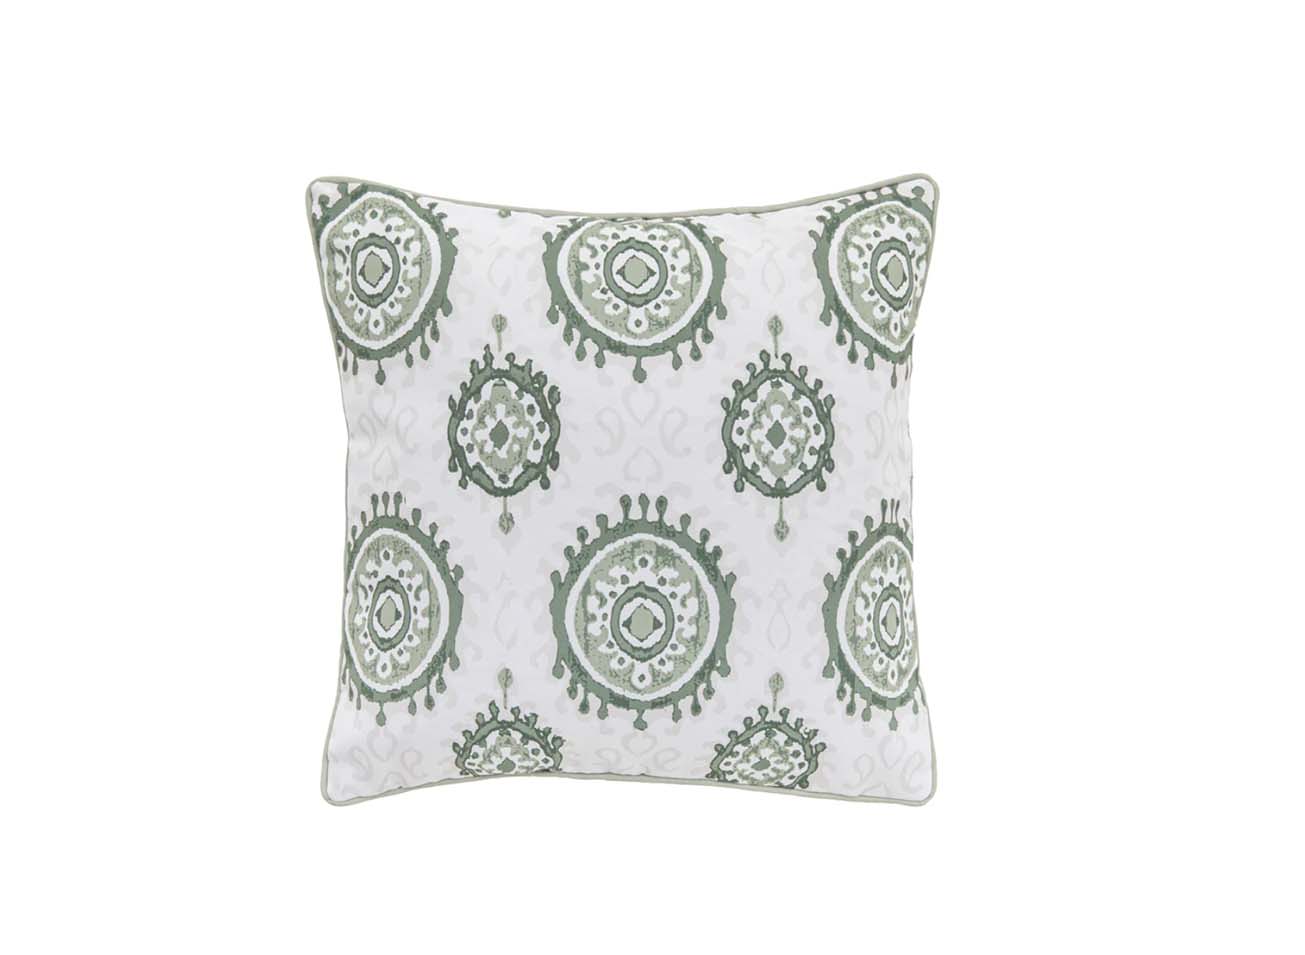 Embrace Outdoor Living: Elevate Your Space with Stylish Cushions